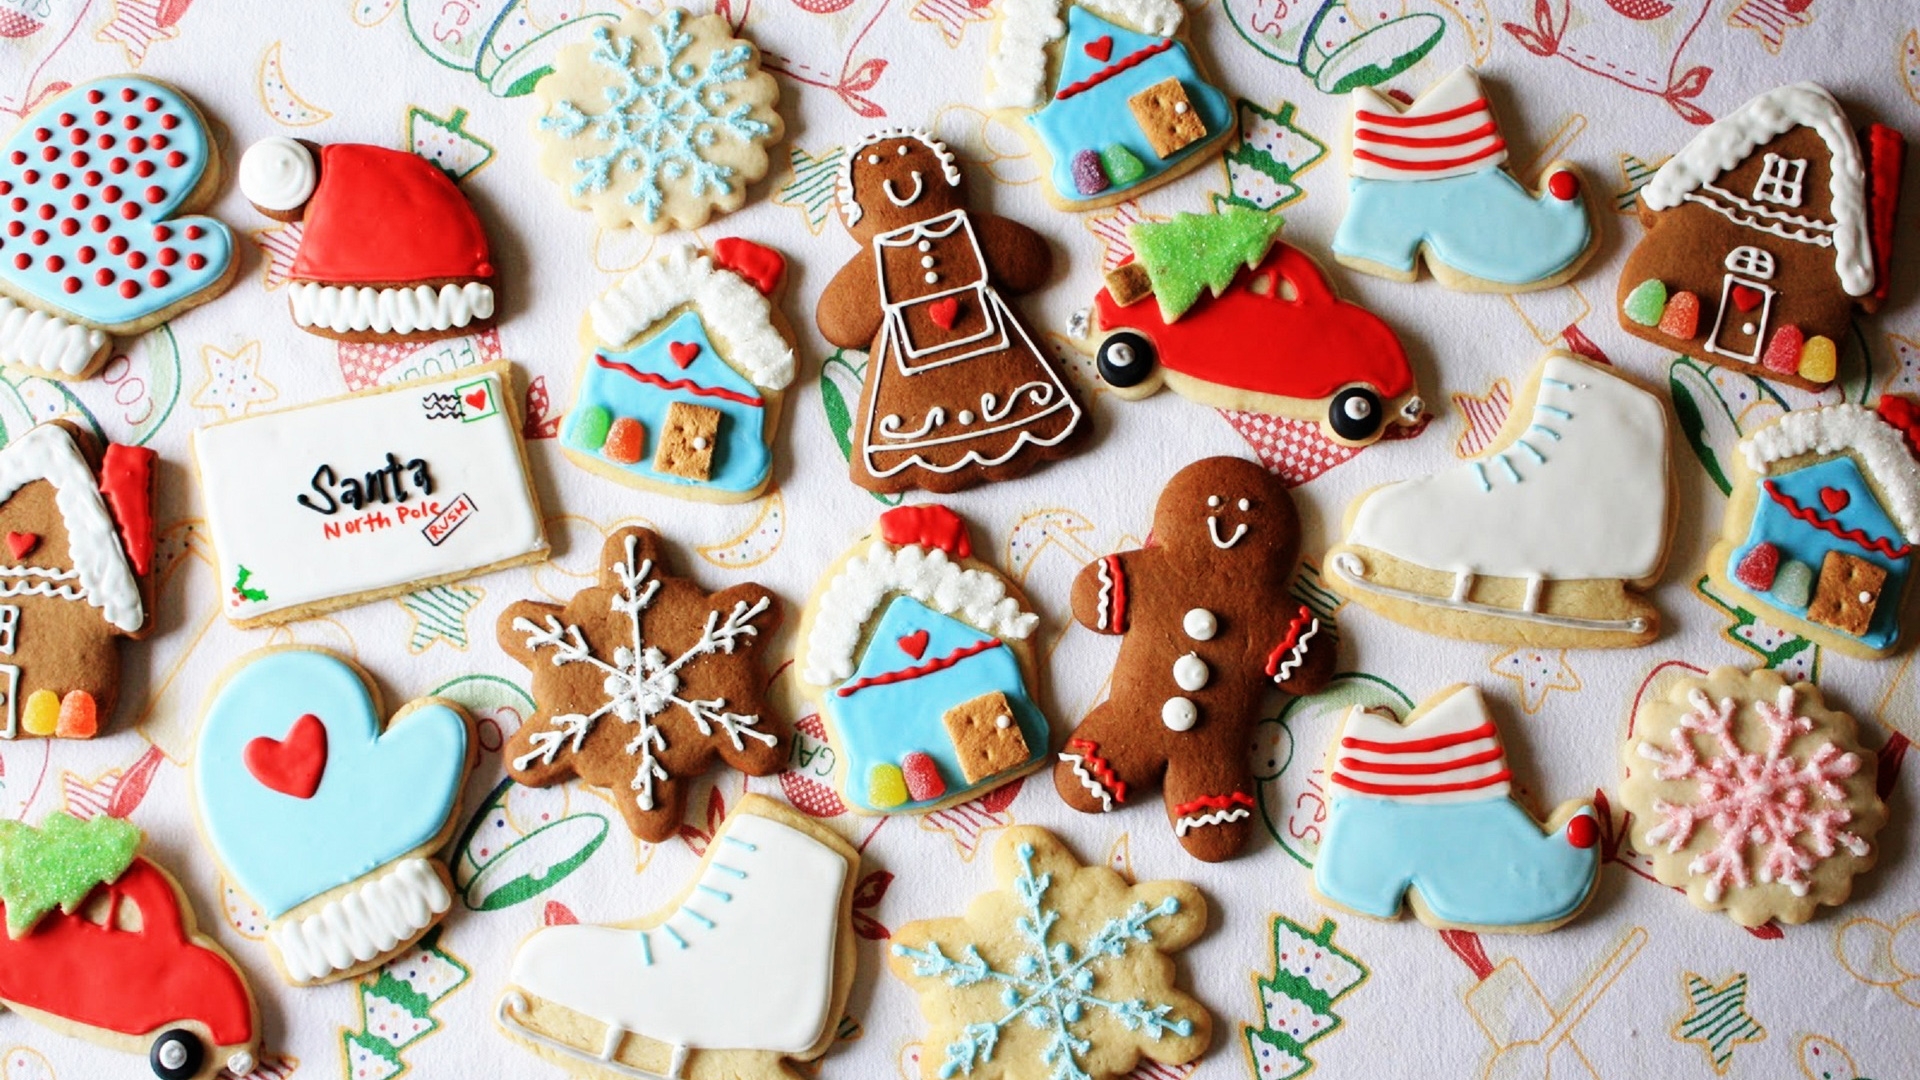 sweet wallpaper,gingerbread,icing,christmas ornament,lebkuchen,cookies and crackers